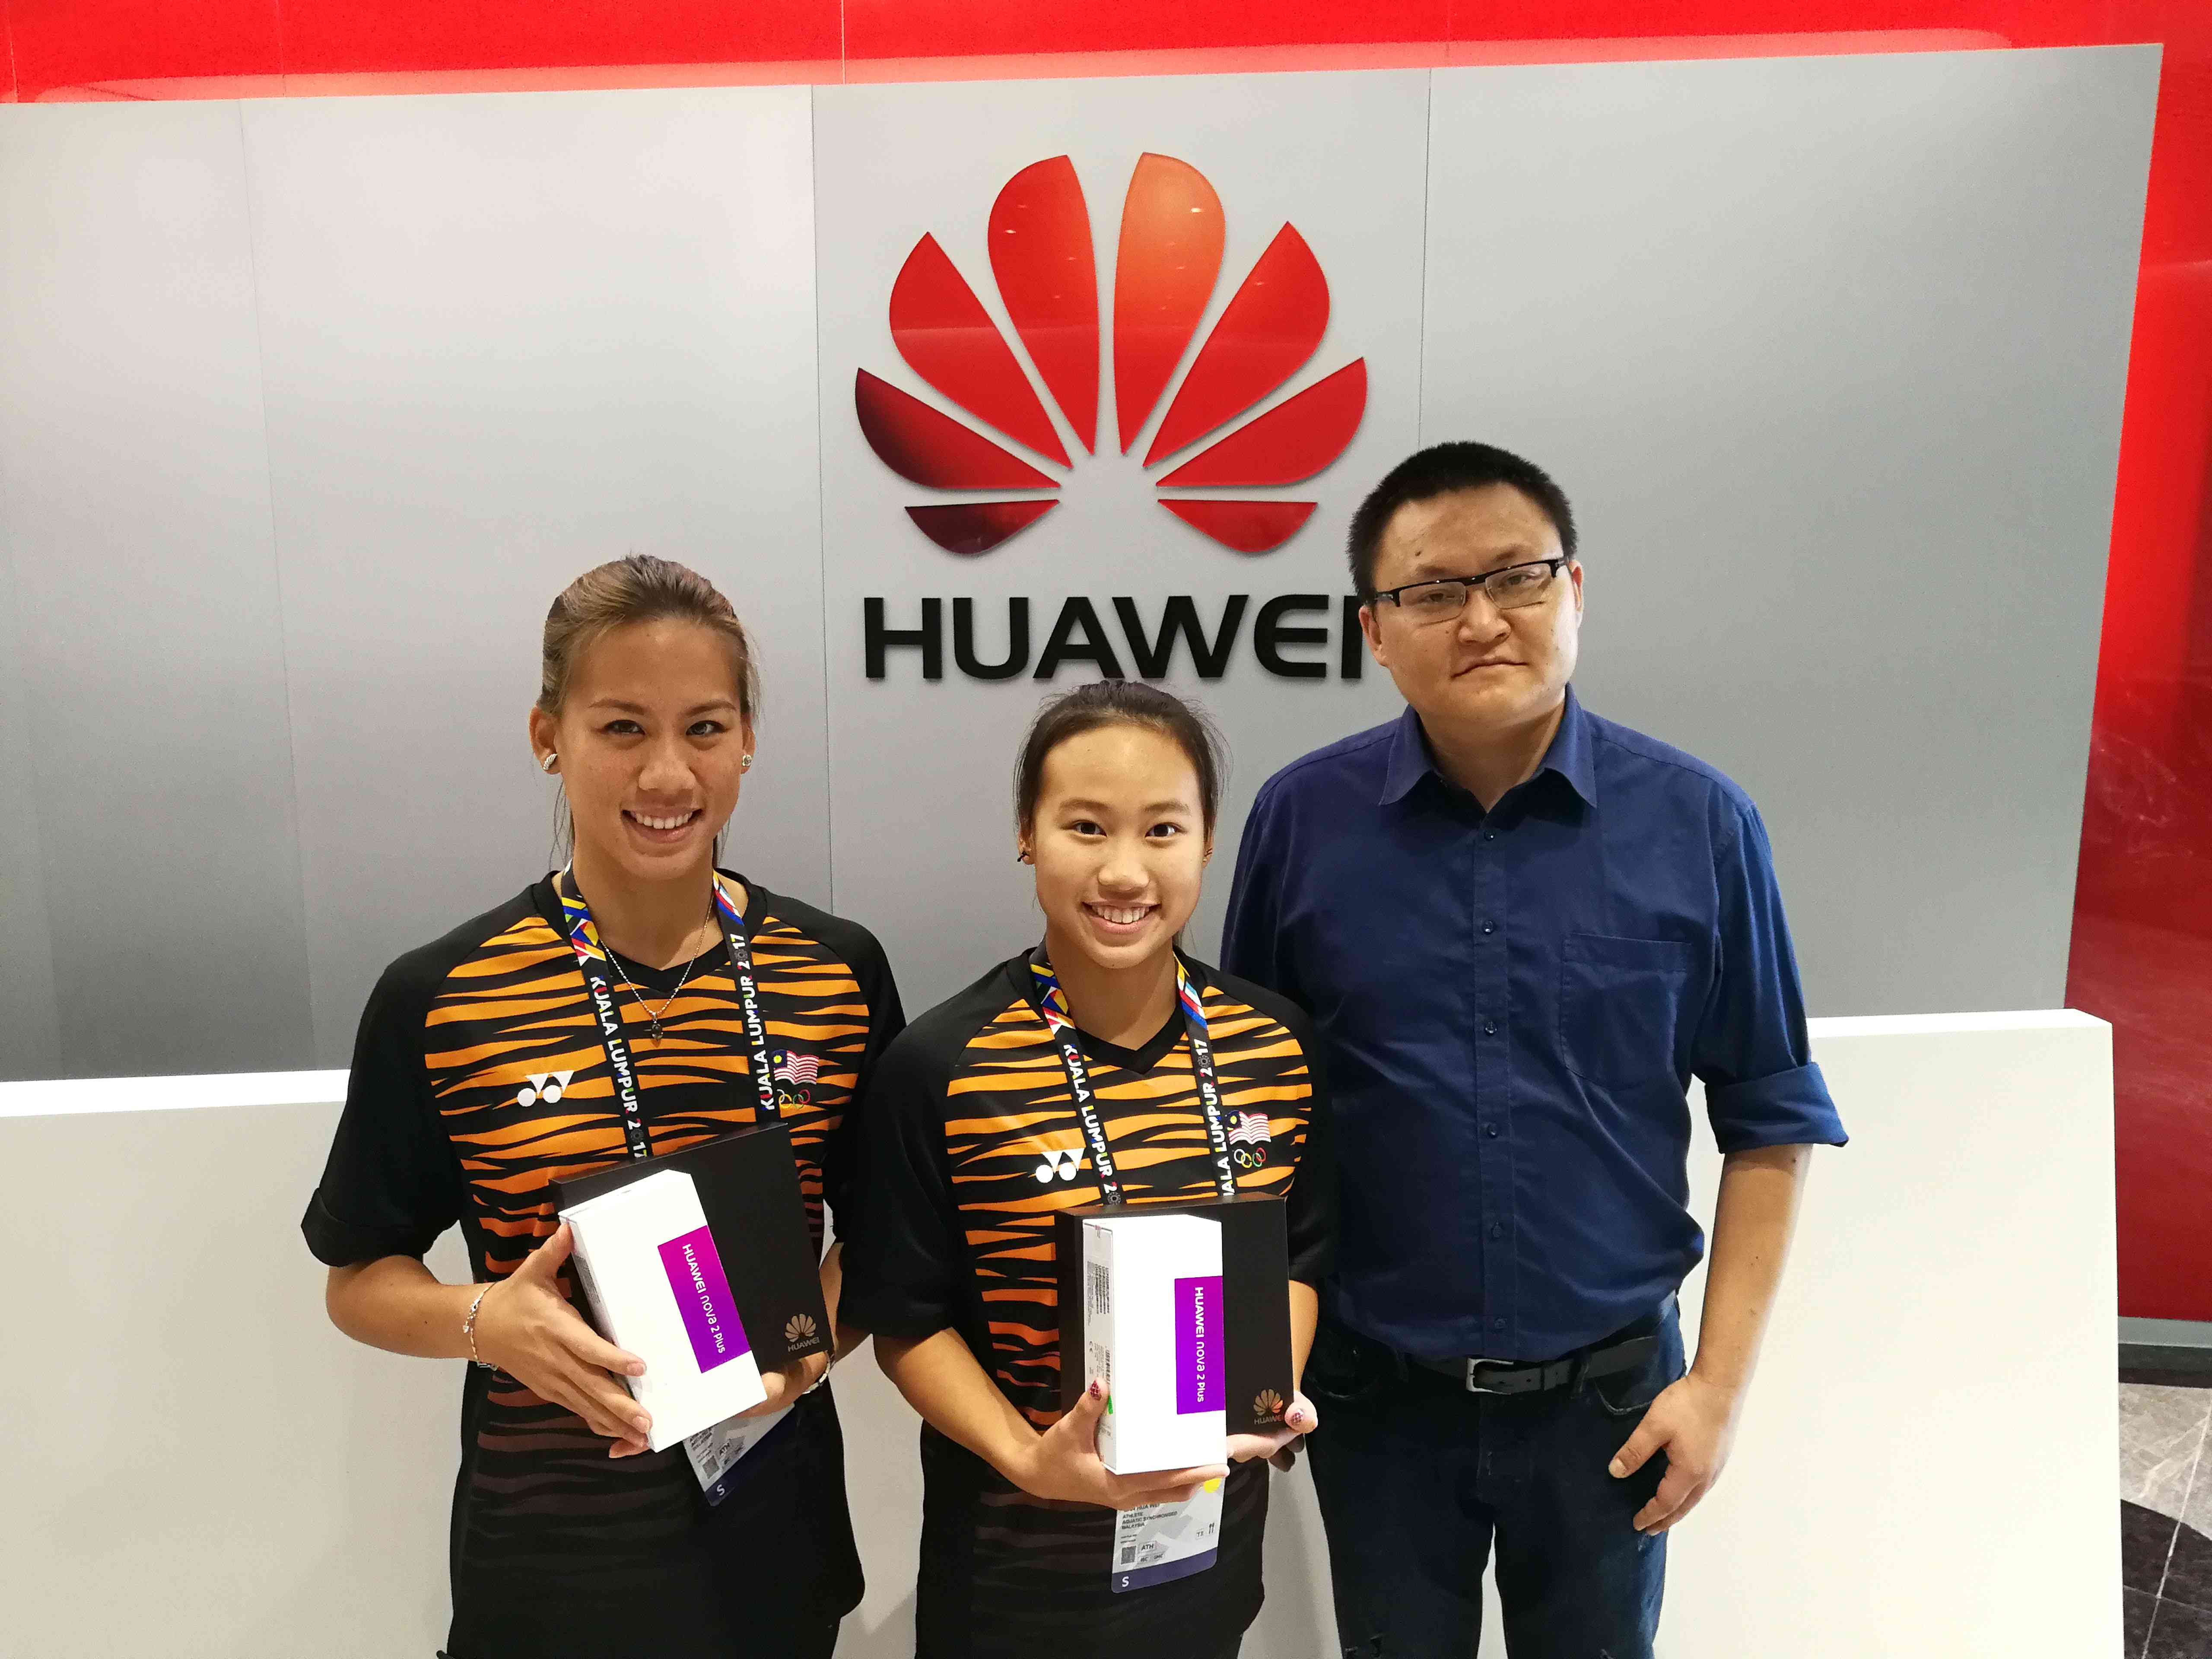 Huawei Malaysia awarded two gold medalists of 29th SEA Games Synchronised Swimming two free Nova 2 Plus smartphones